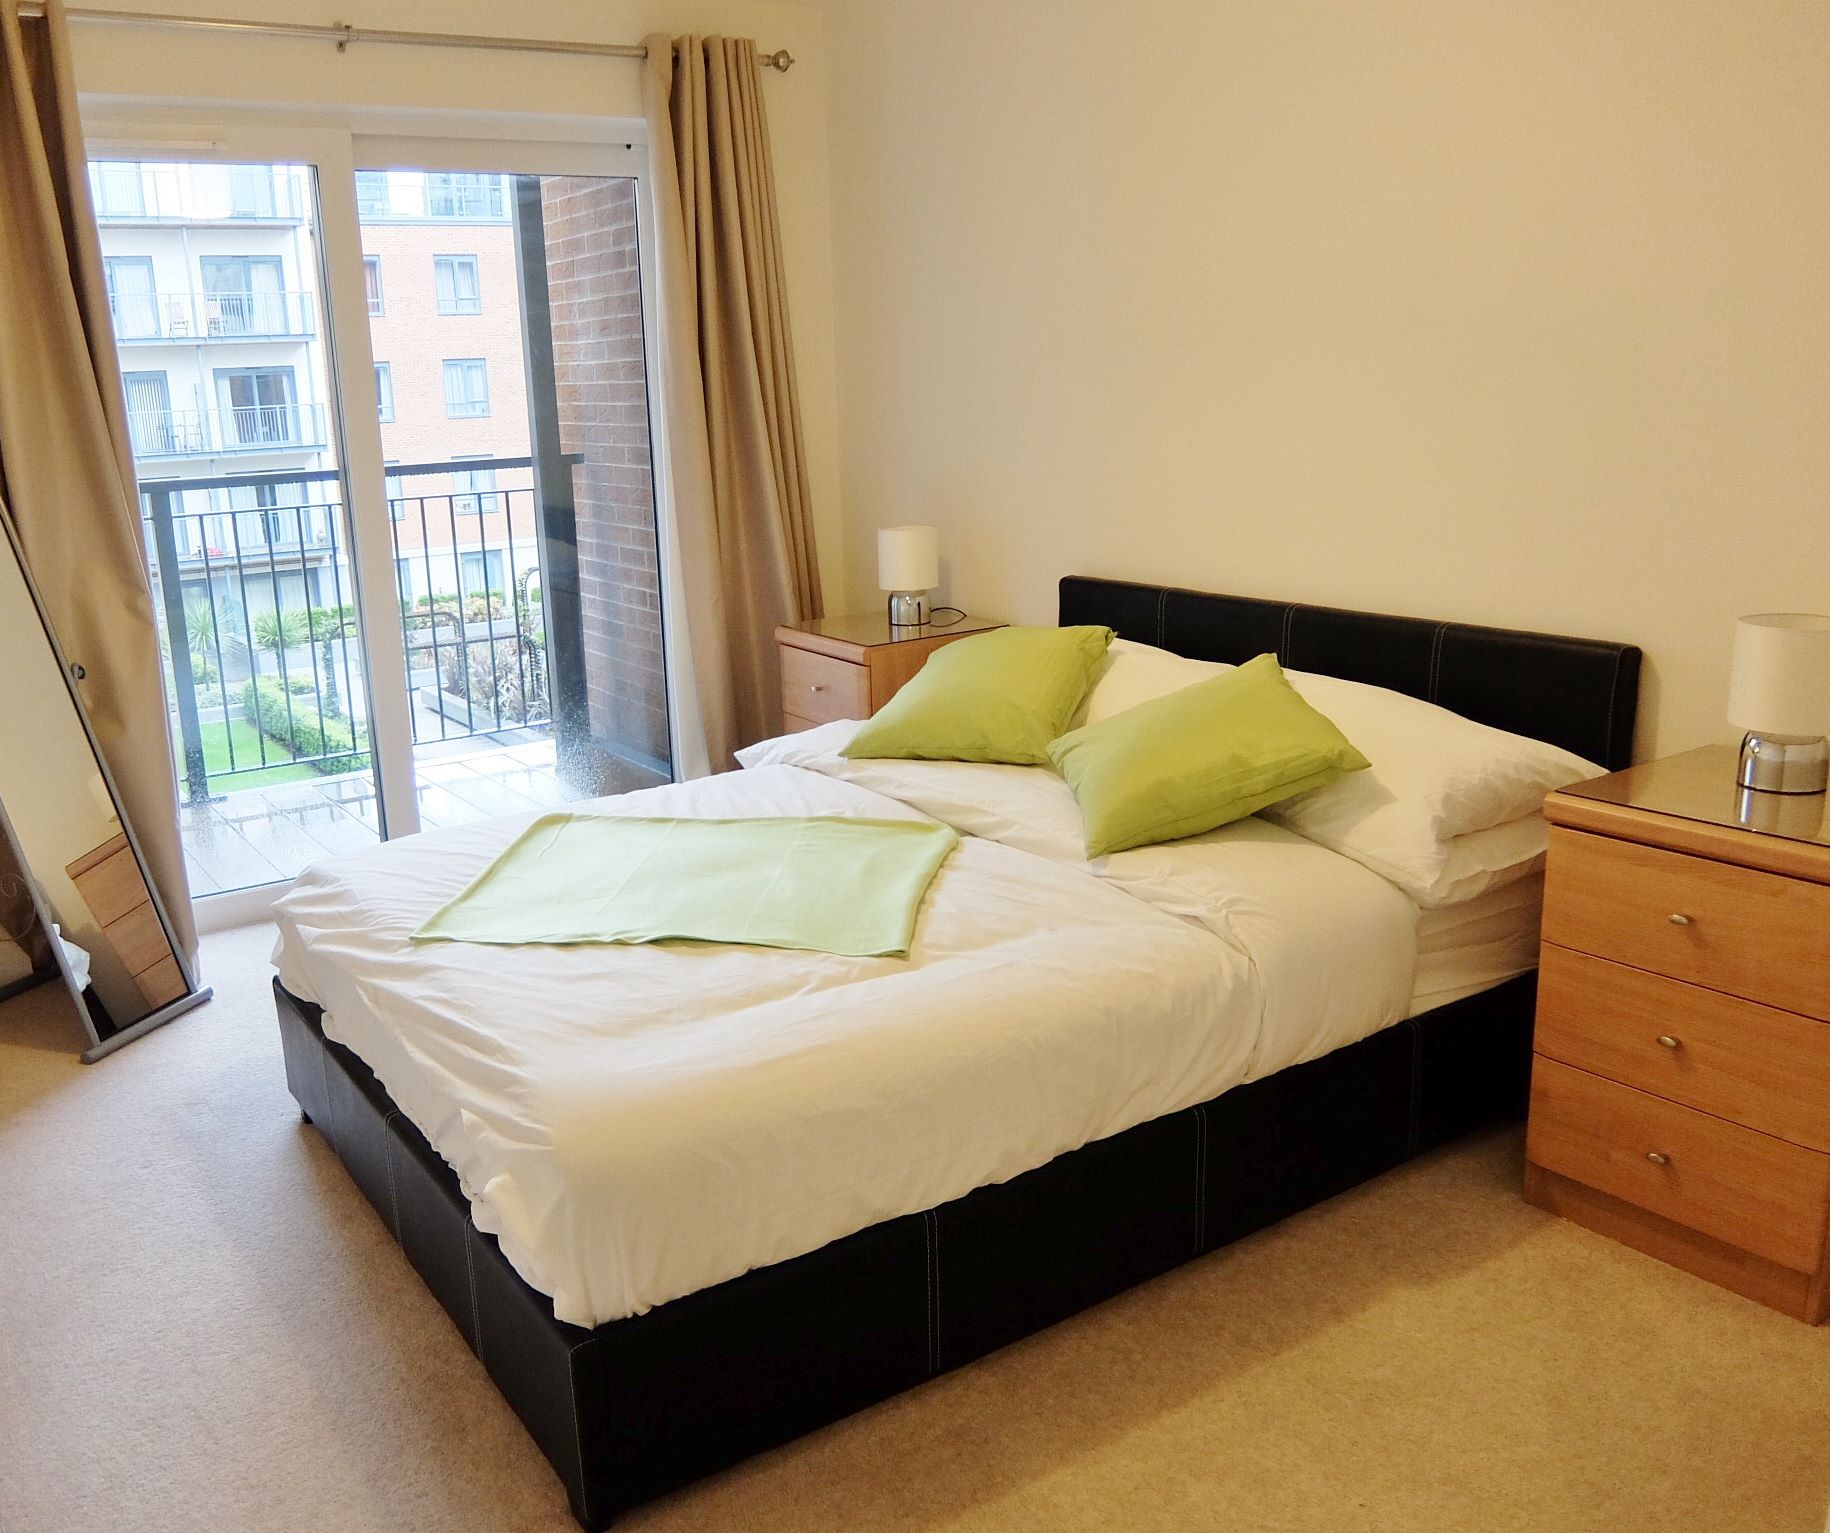 Book-Colindale-Serviced-Apartments-in-North-London-now.-This-self-catering-accommodation-with-balcony-has-Wifi,-a-smart-TV-and-full-kitchen.